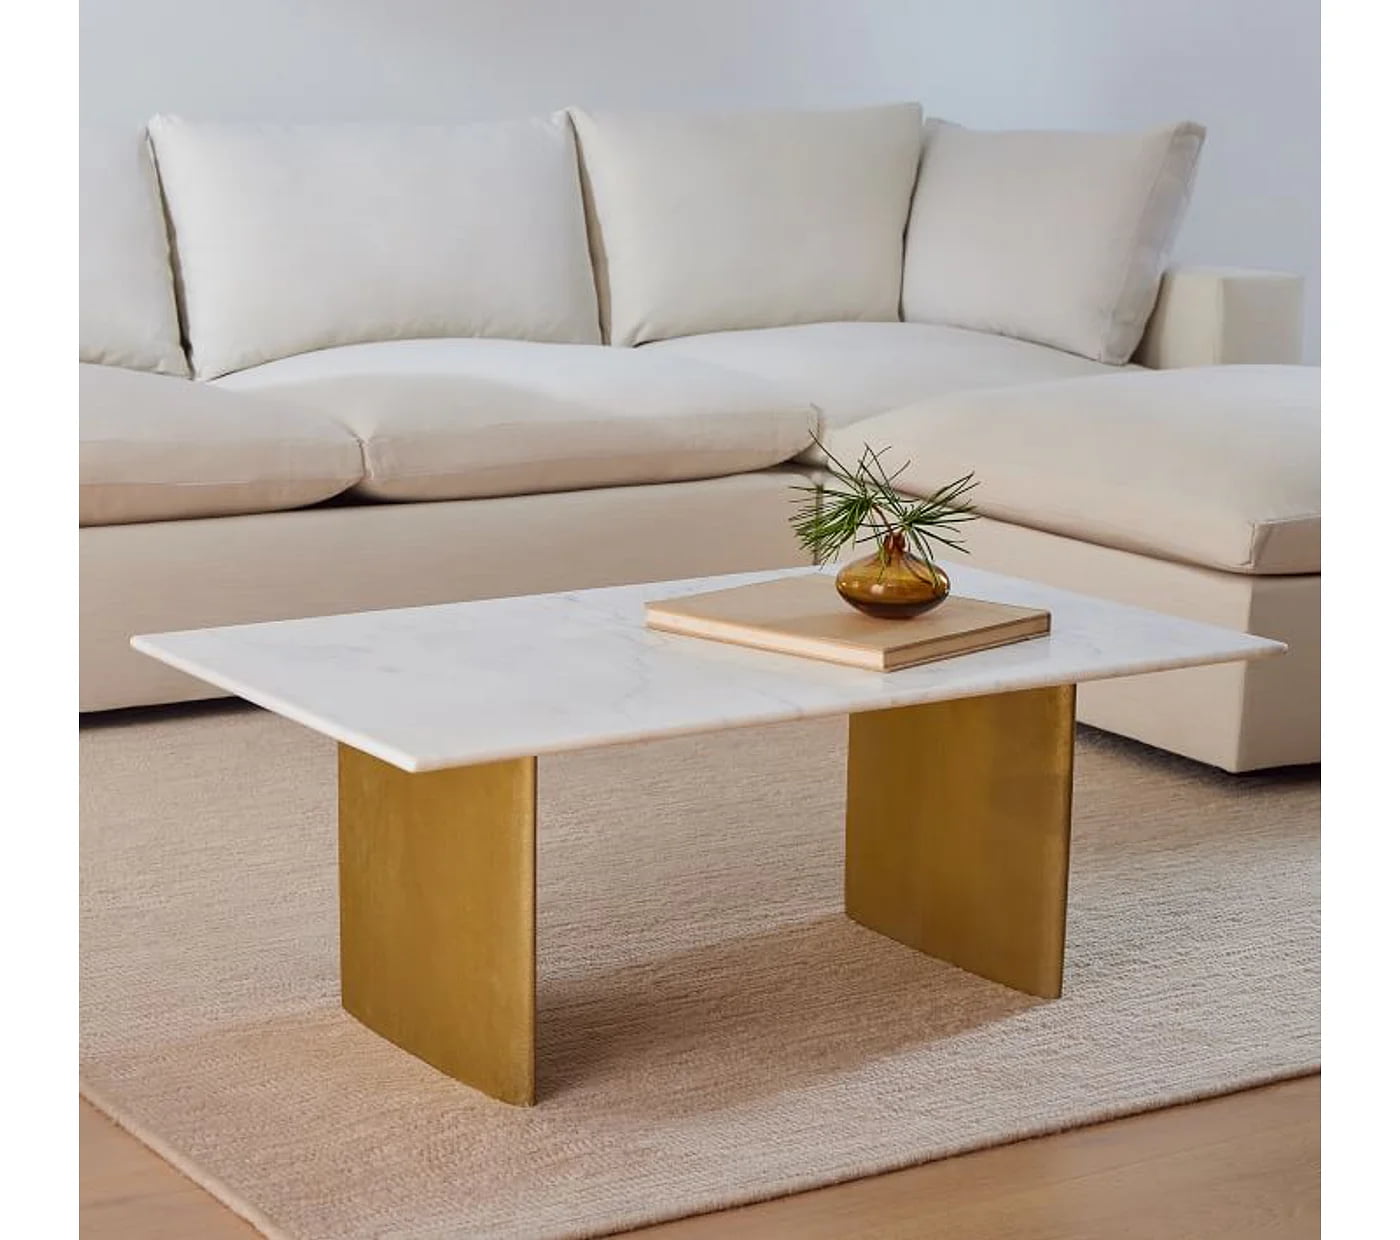 marble table top, sleek gold faux base, beige coloured sofa, classic styled centre piece for your living room, carpet, wooden laminated floor